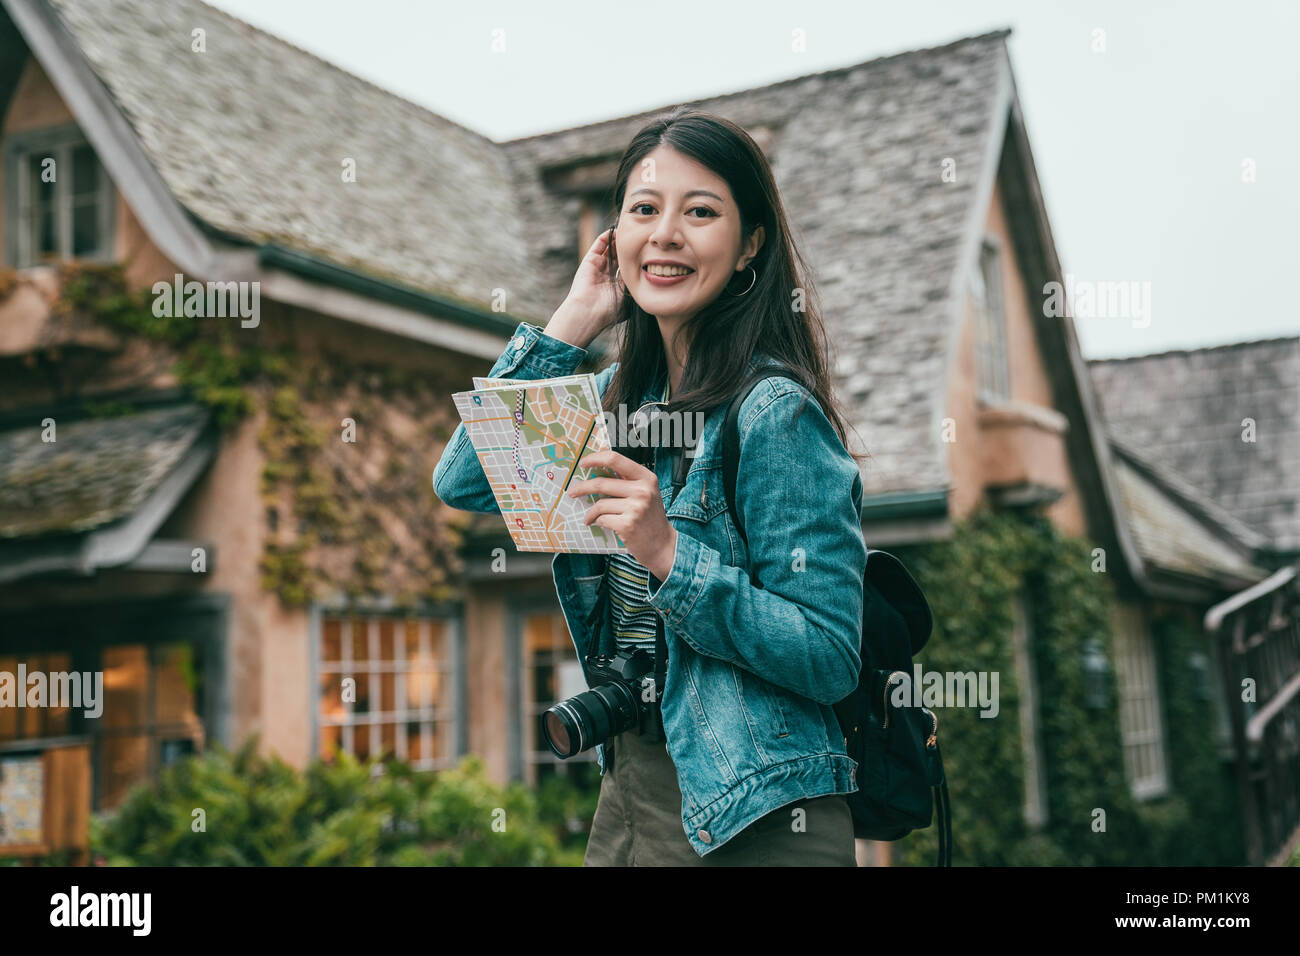 woman smiling joyfully and holding a guide map in hands while walking into a small and stunning town. Stock Photo